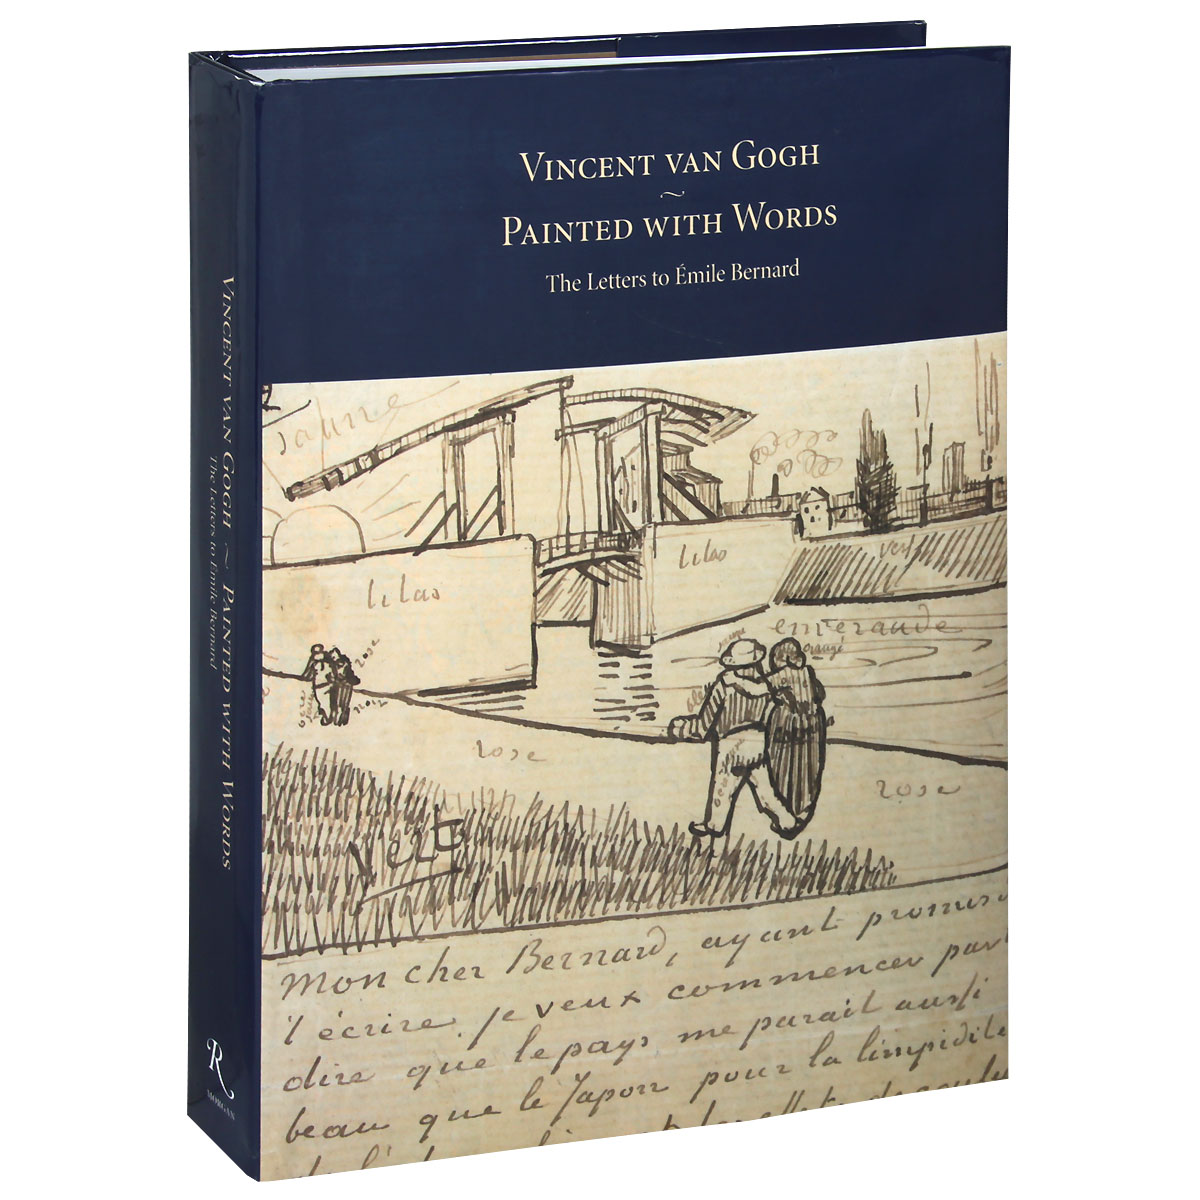 Van Gogh: Painted with Words: The Letters to Emile Bernard